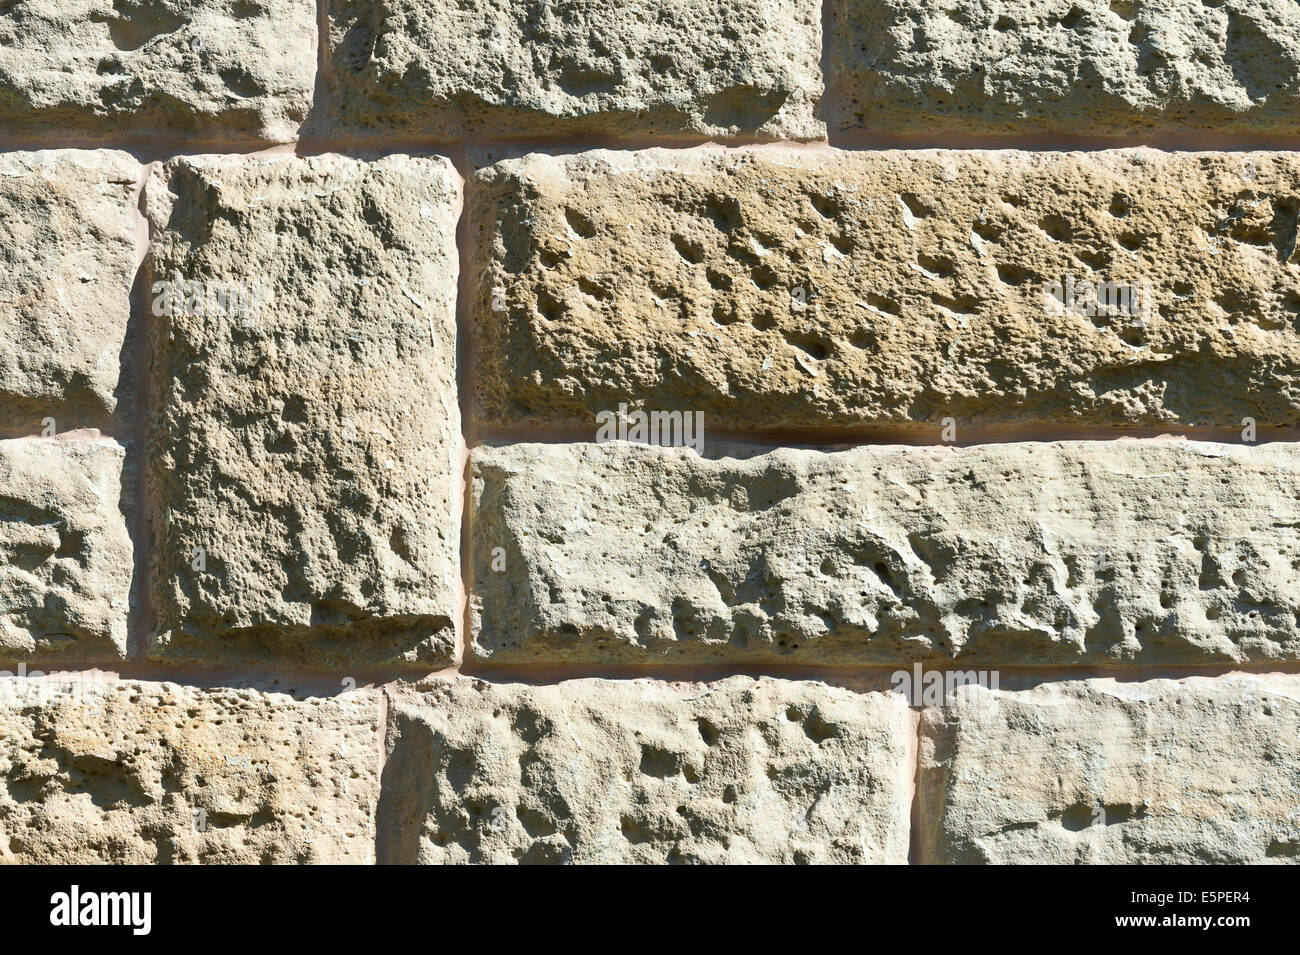 Worked stone wall, Baden-Württemberg, Germany Stock Photo